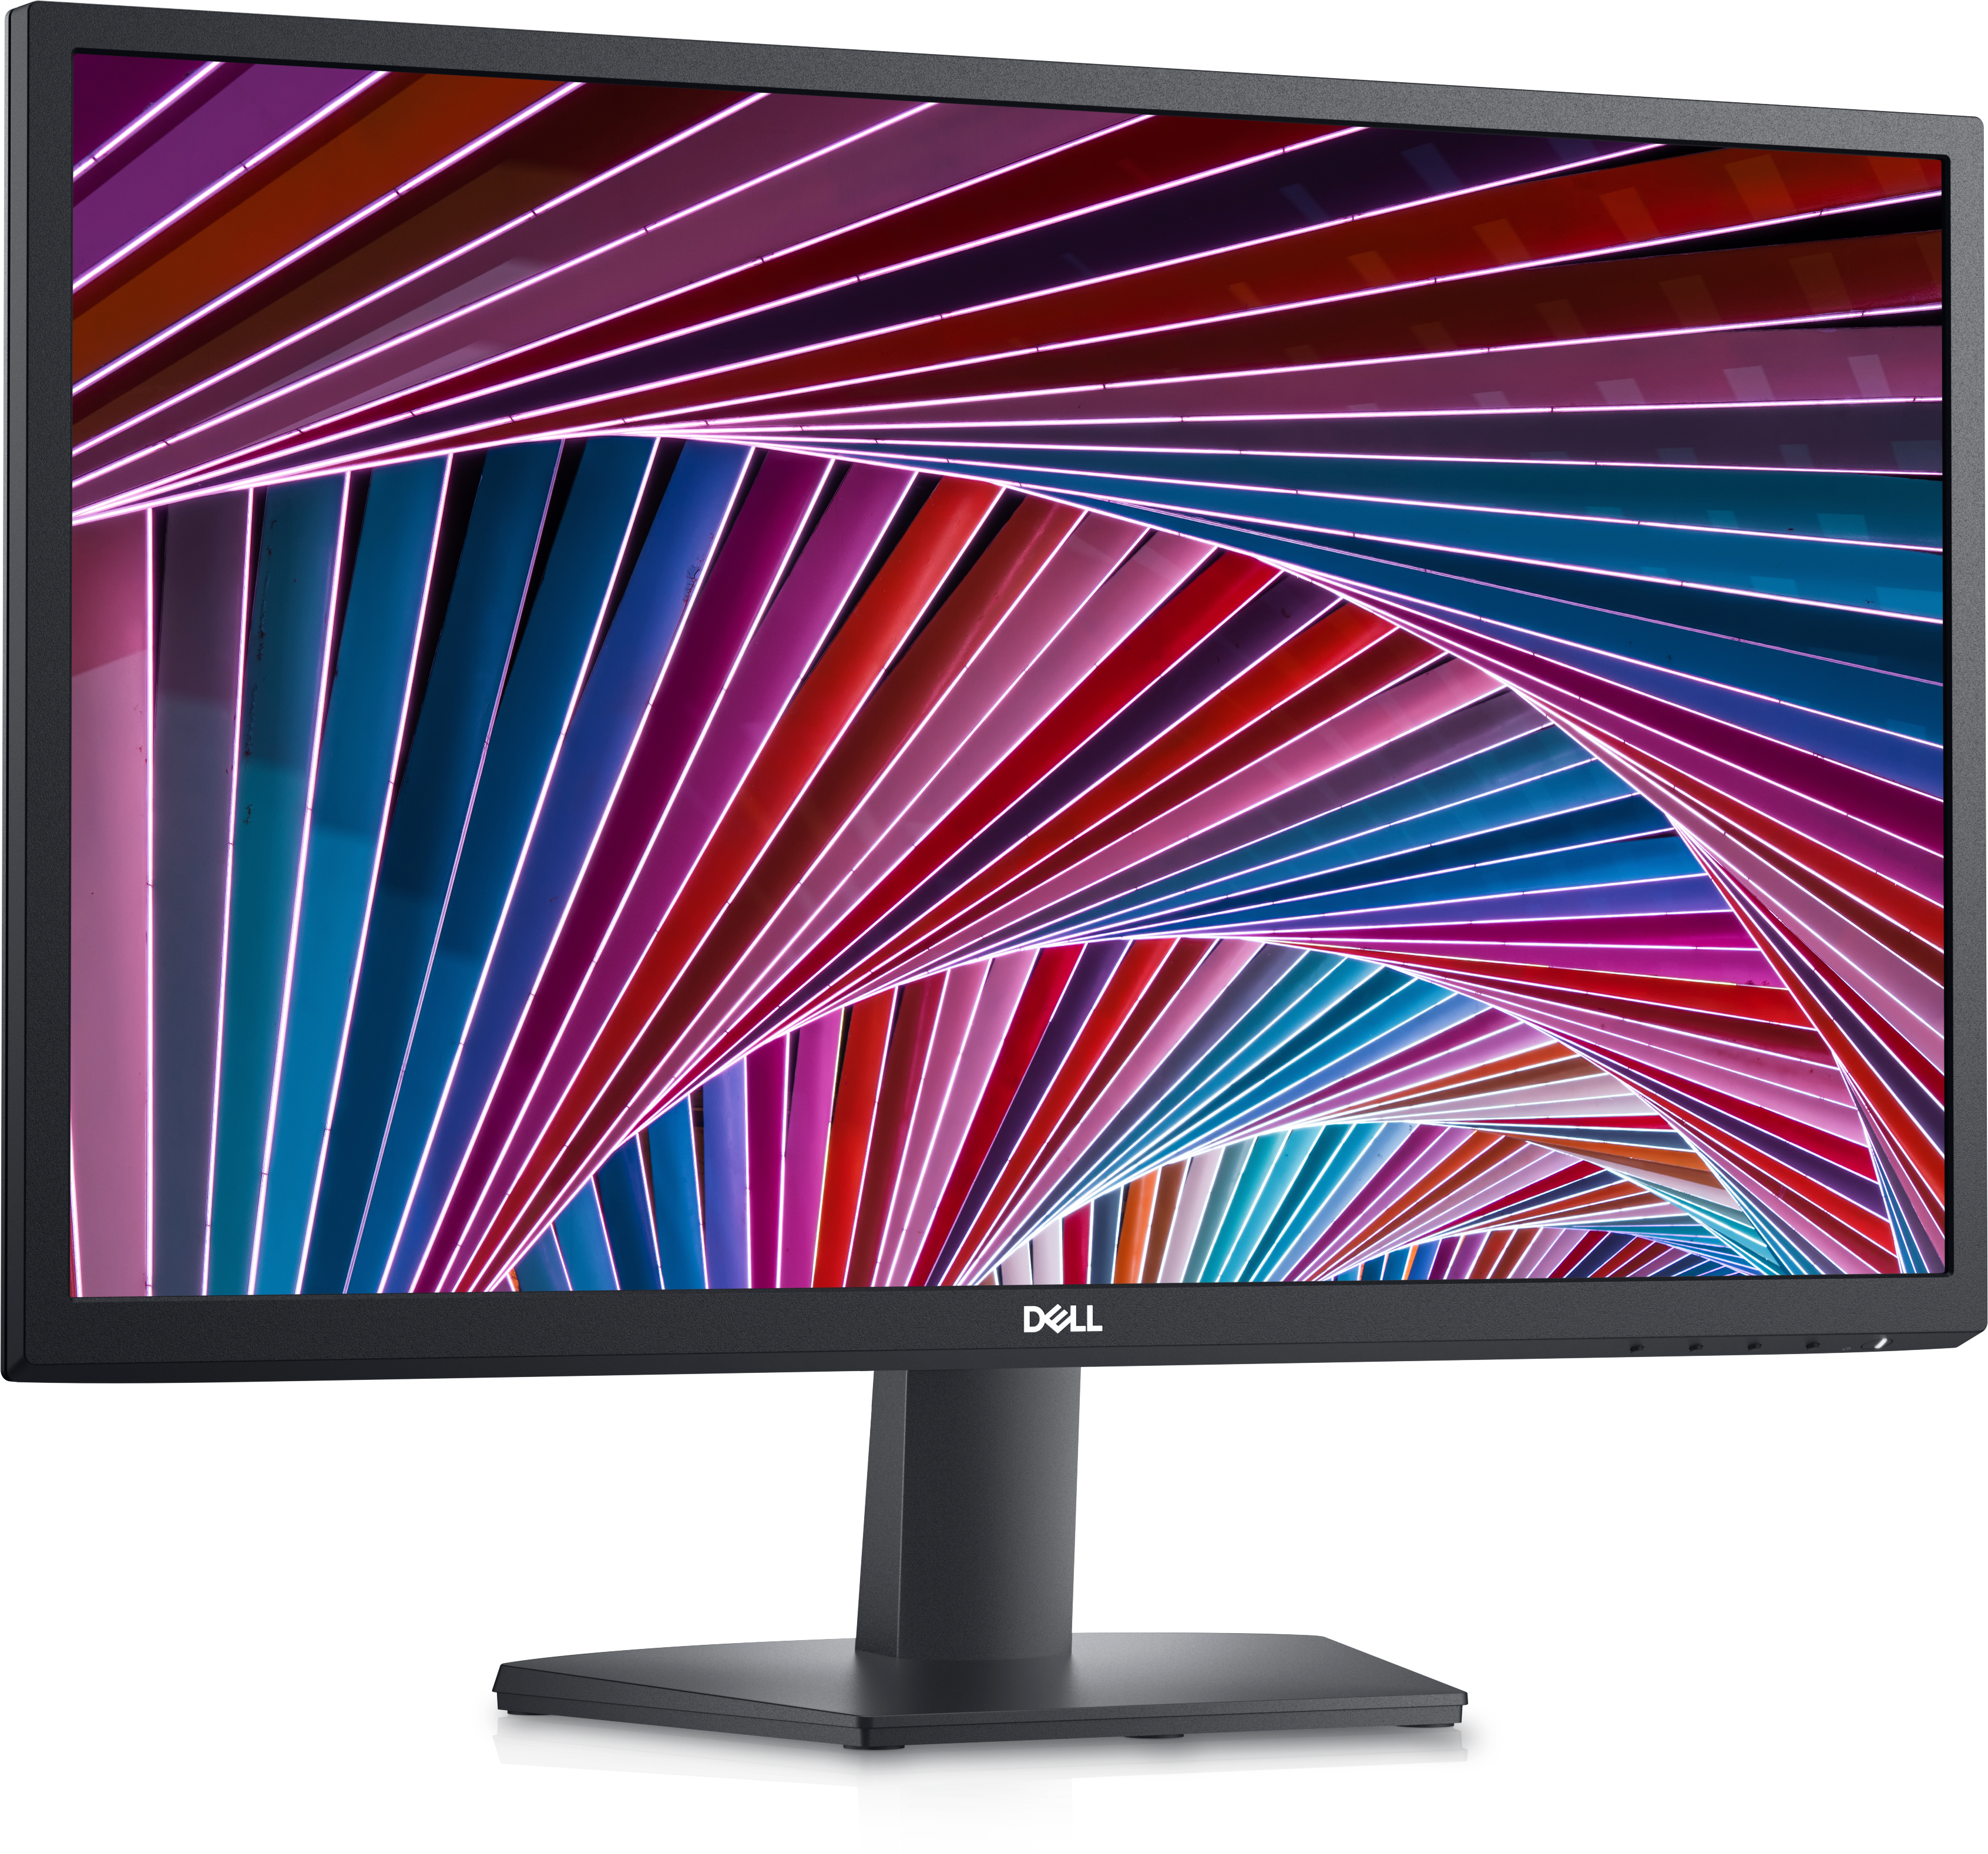 Dell 24 inch Monitor FHD (1920 x 1080) 16:9 Ratio with Comfortview